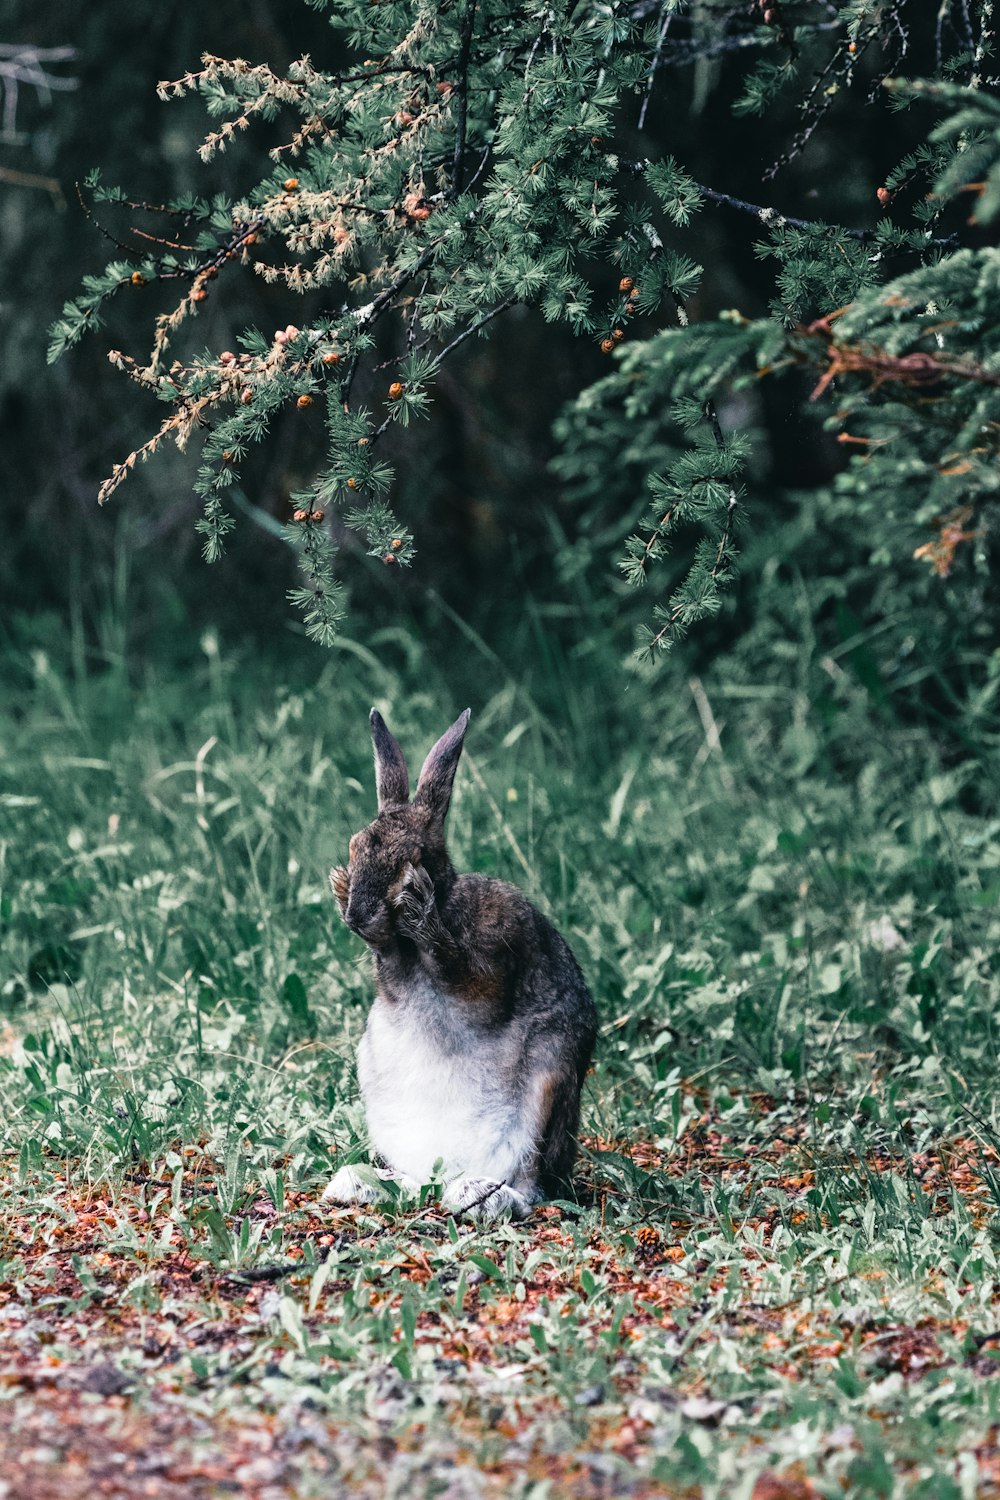 a rabbit sitting in the grass next to a tree